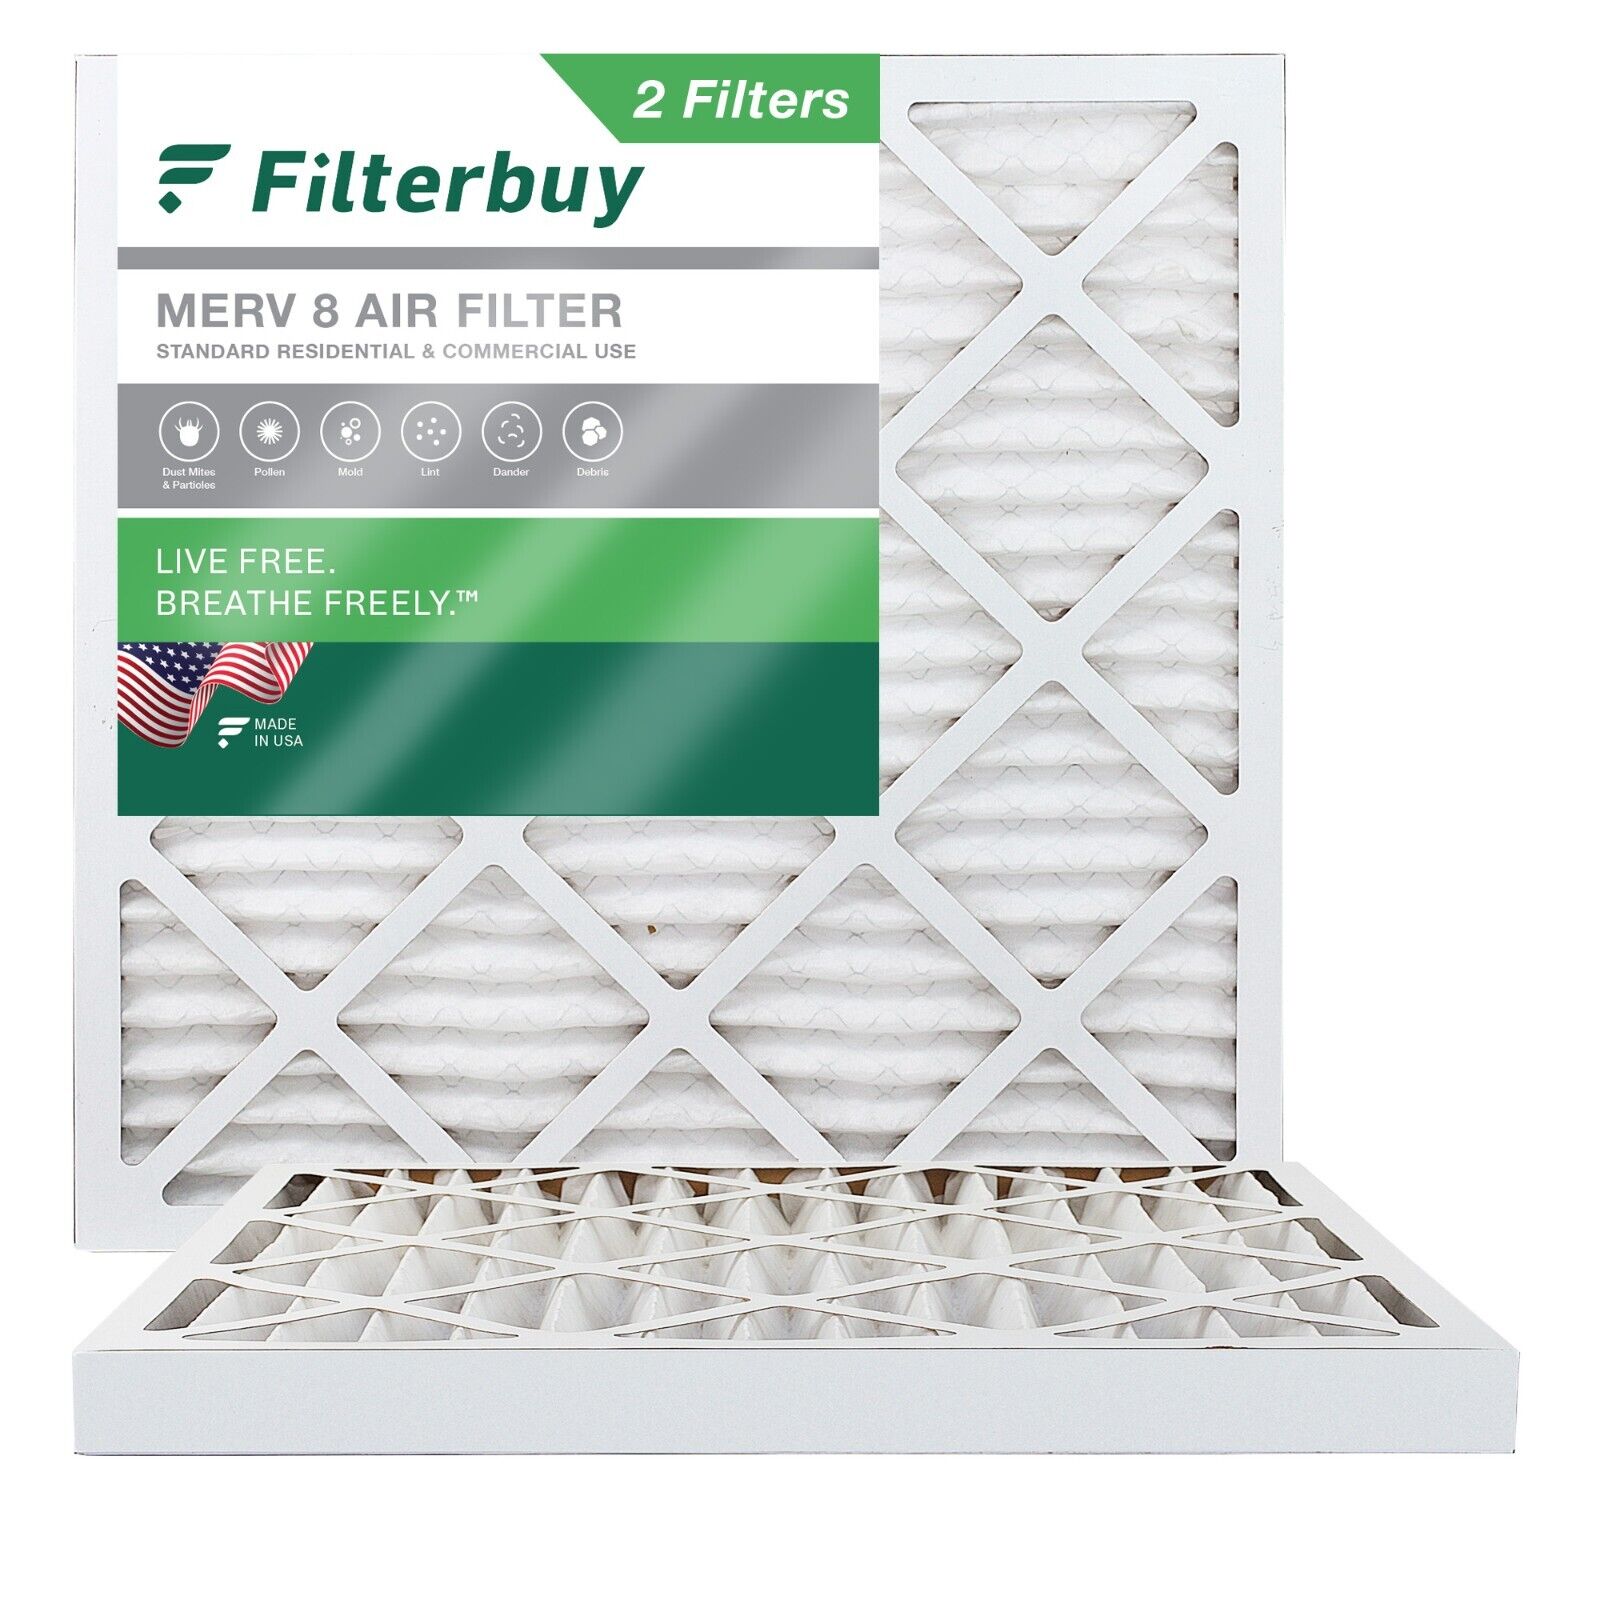 Filterbuy 24x24x2 Pleated Air Filters, Replacement for HVAC AC Furnace (MERV 8)